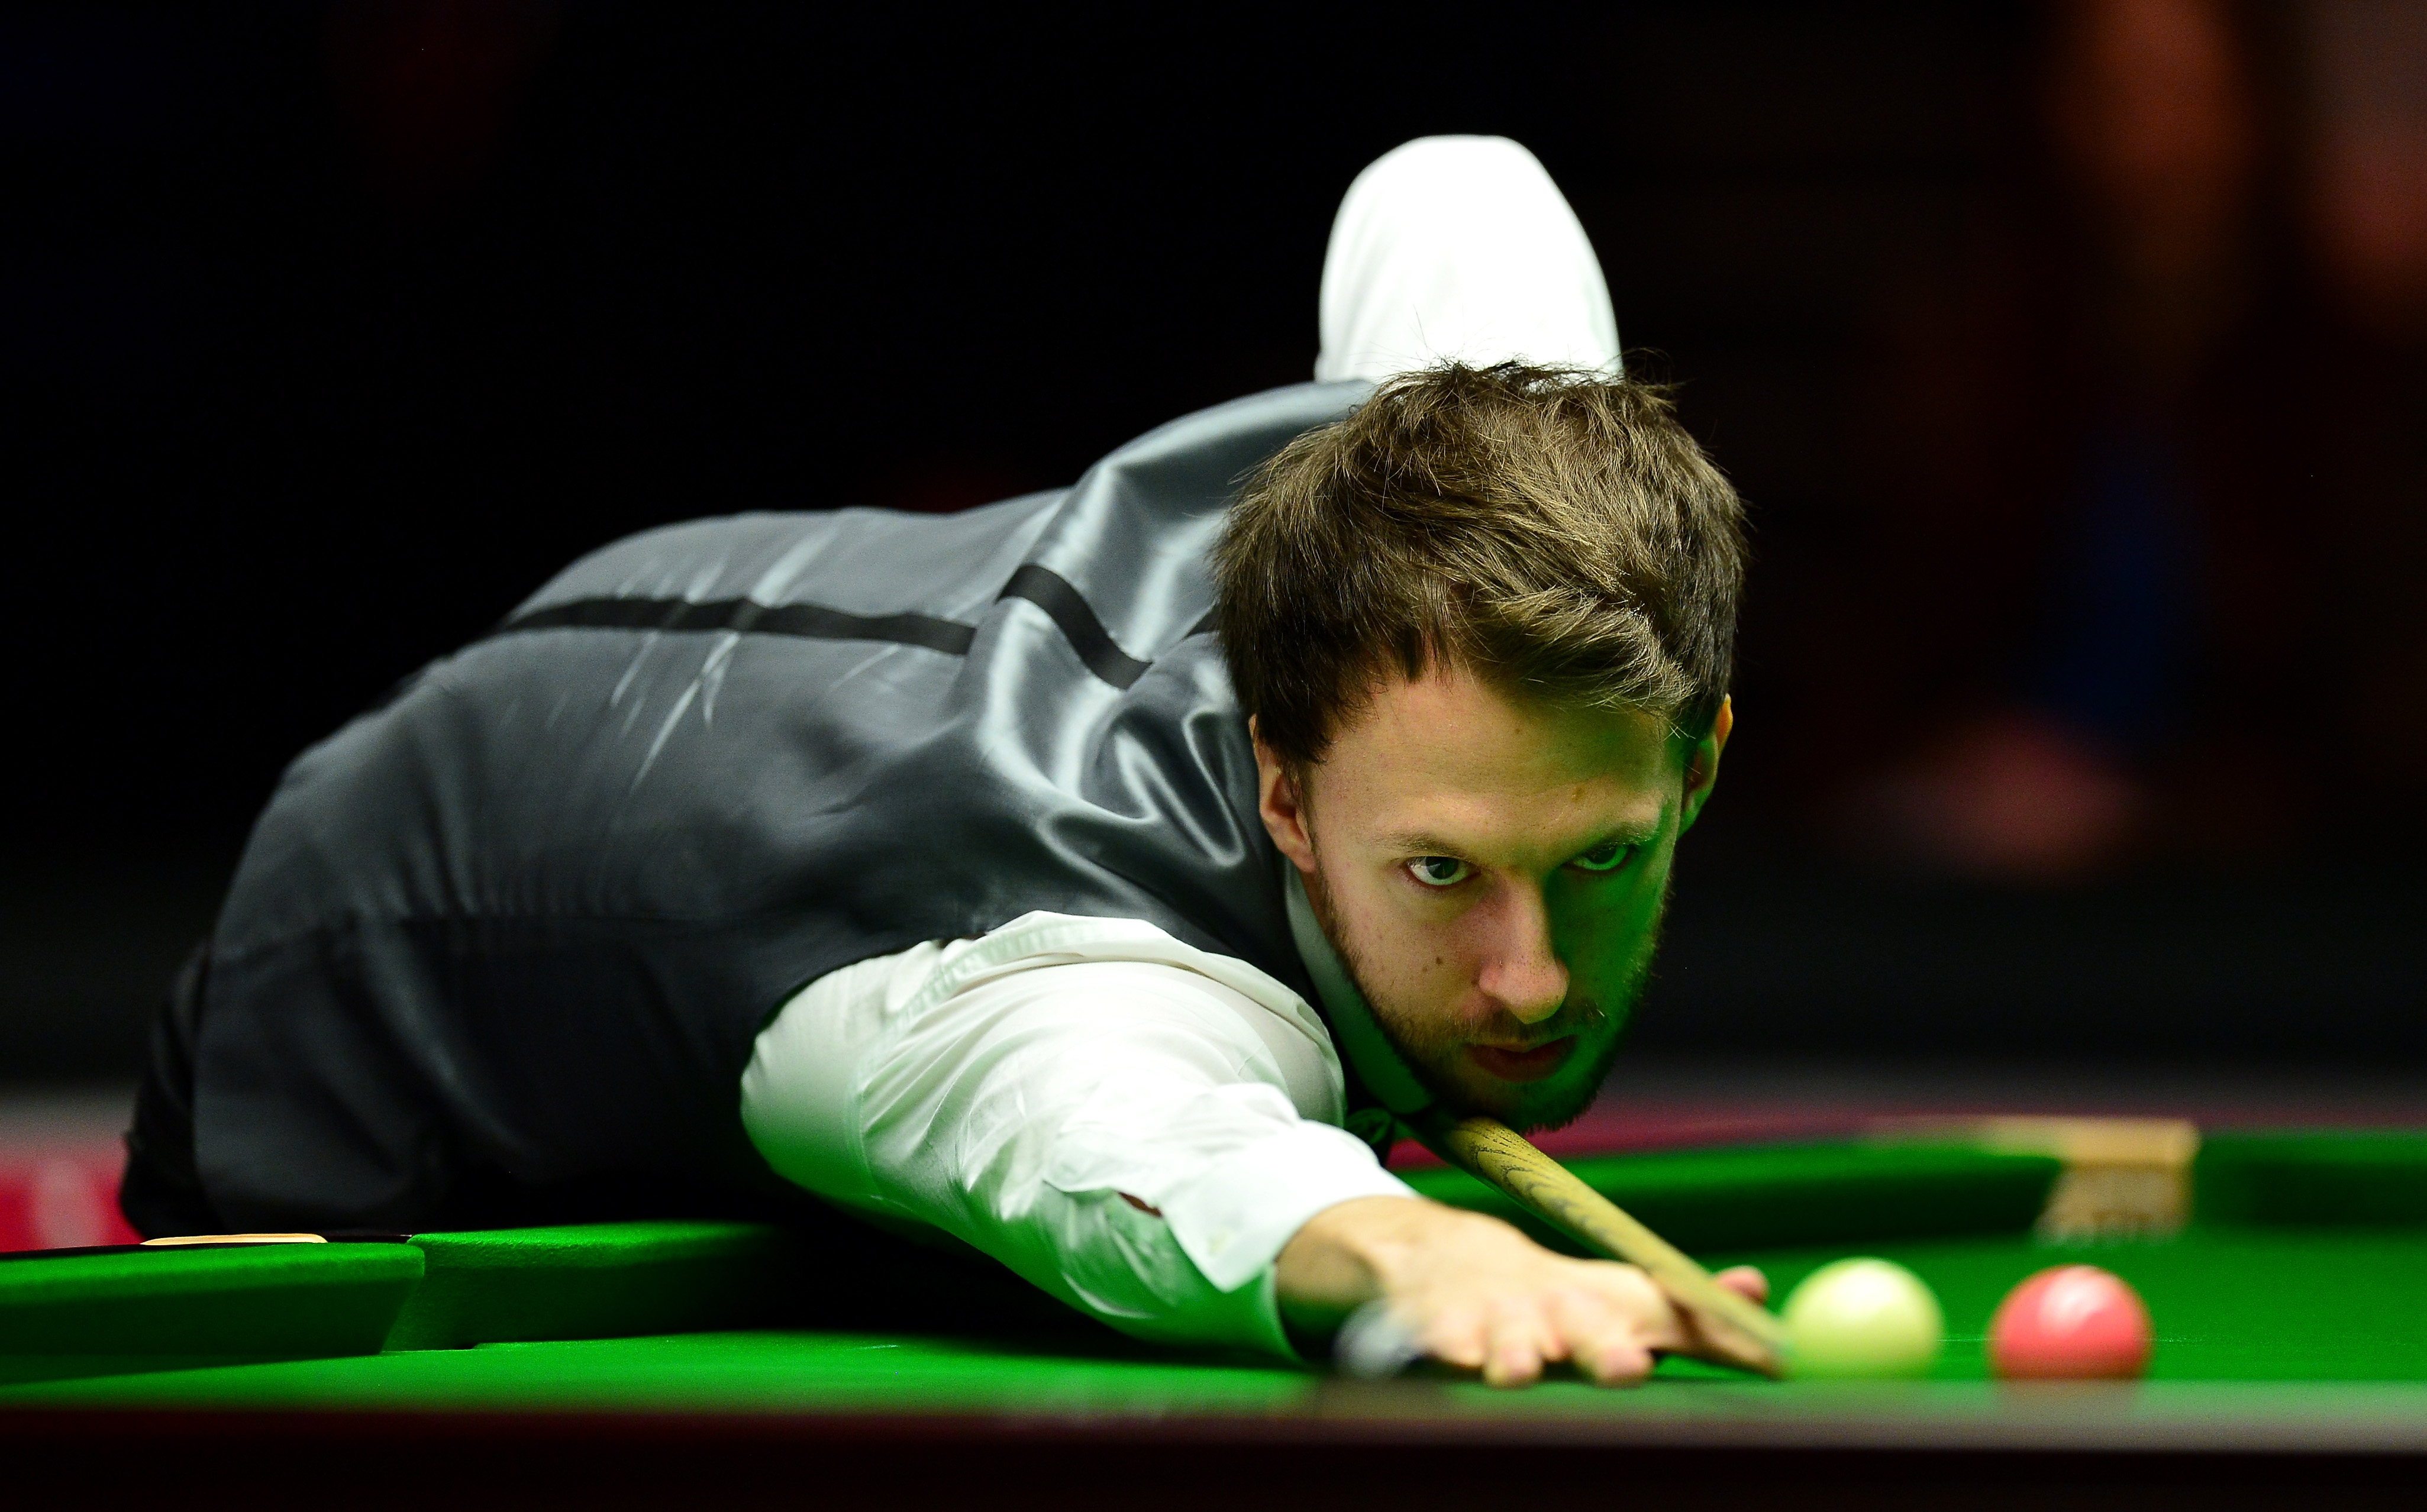 European Masters snooker 2017 Draw, schedule, results, betting odds and Eurosport TV times